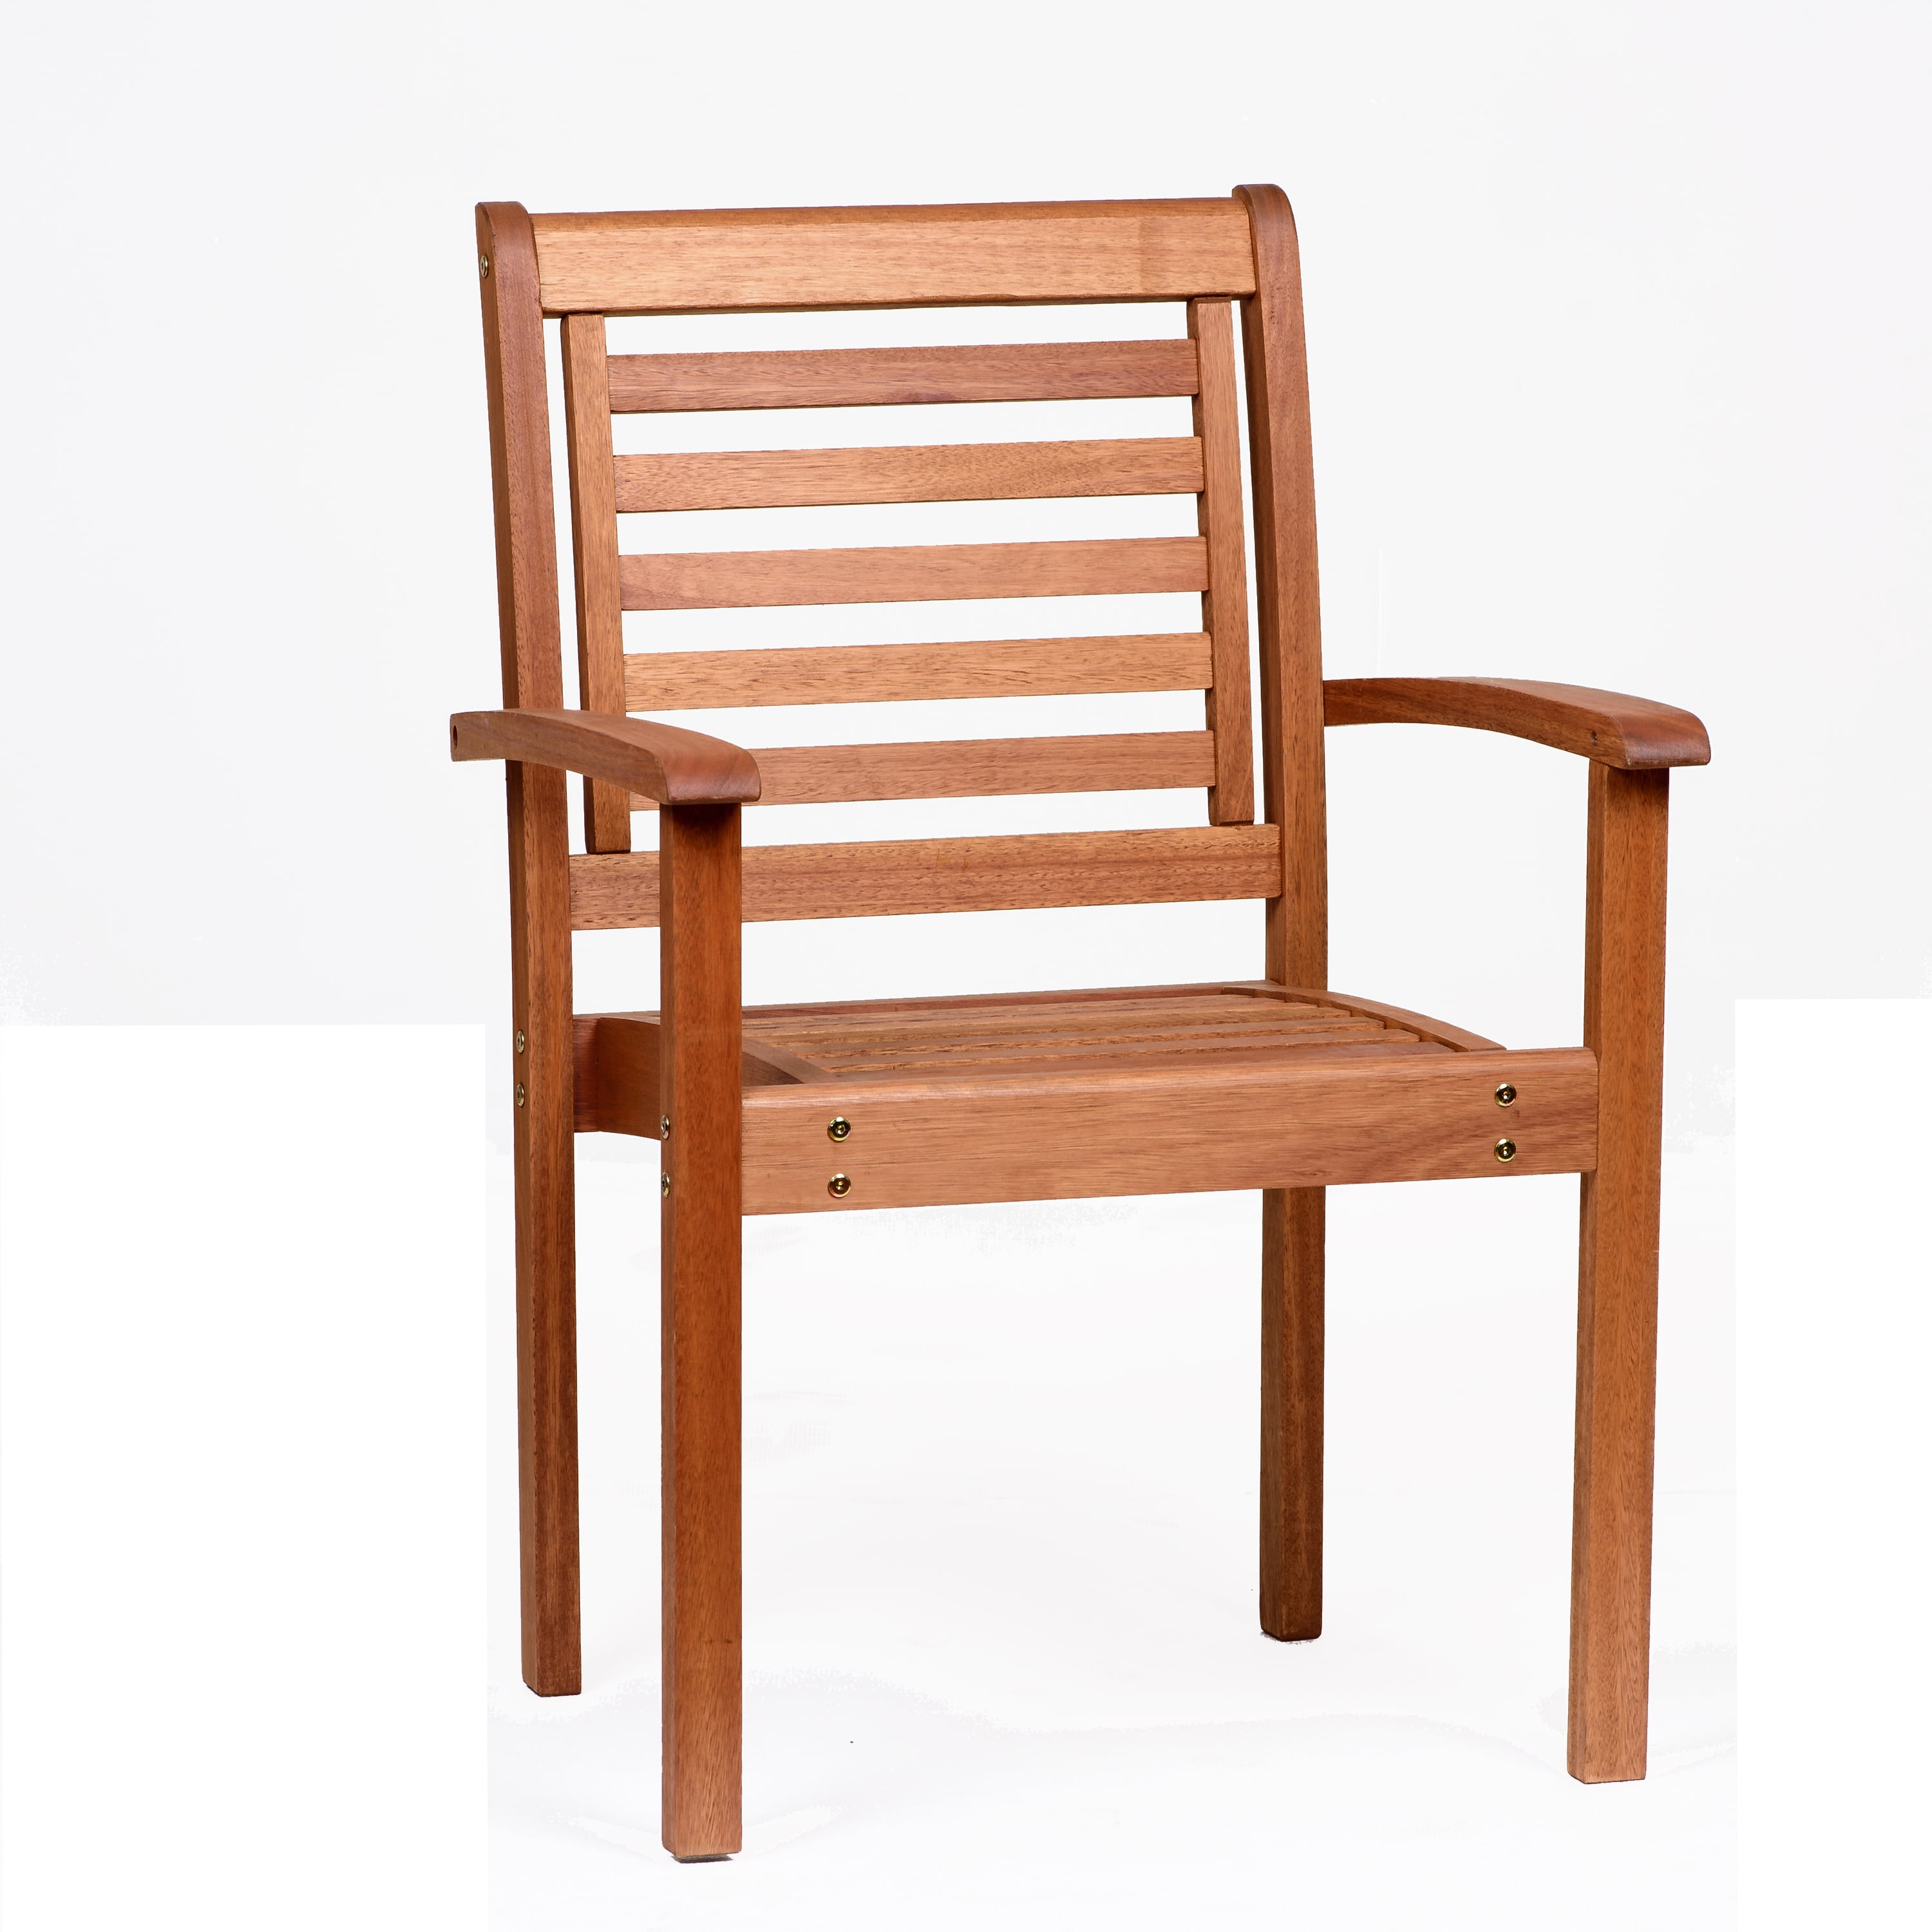 Amazonia Milano Stackable Chair Eucalyptus Wood Ideal For